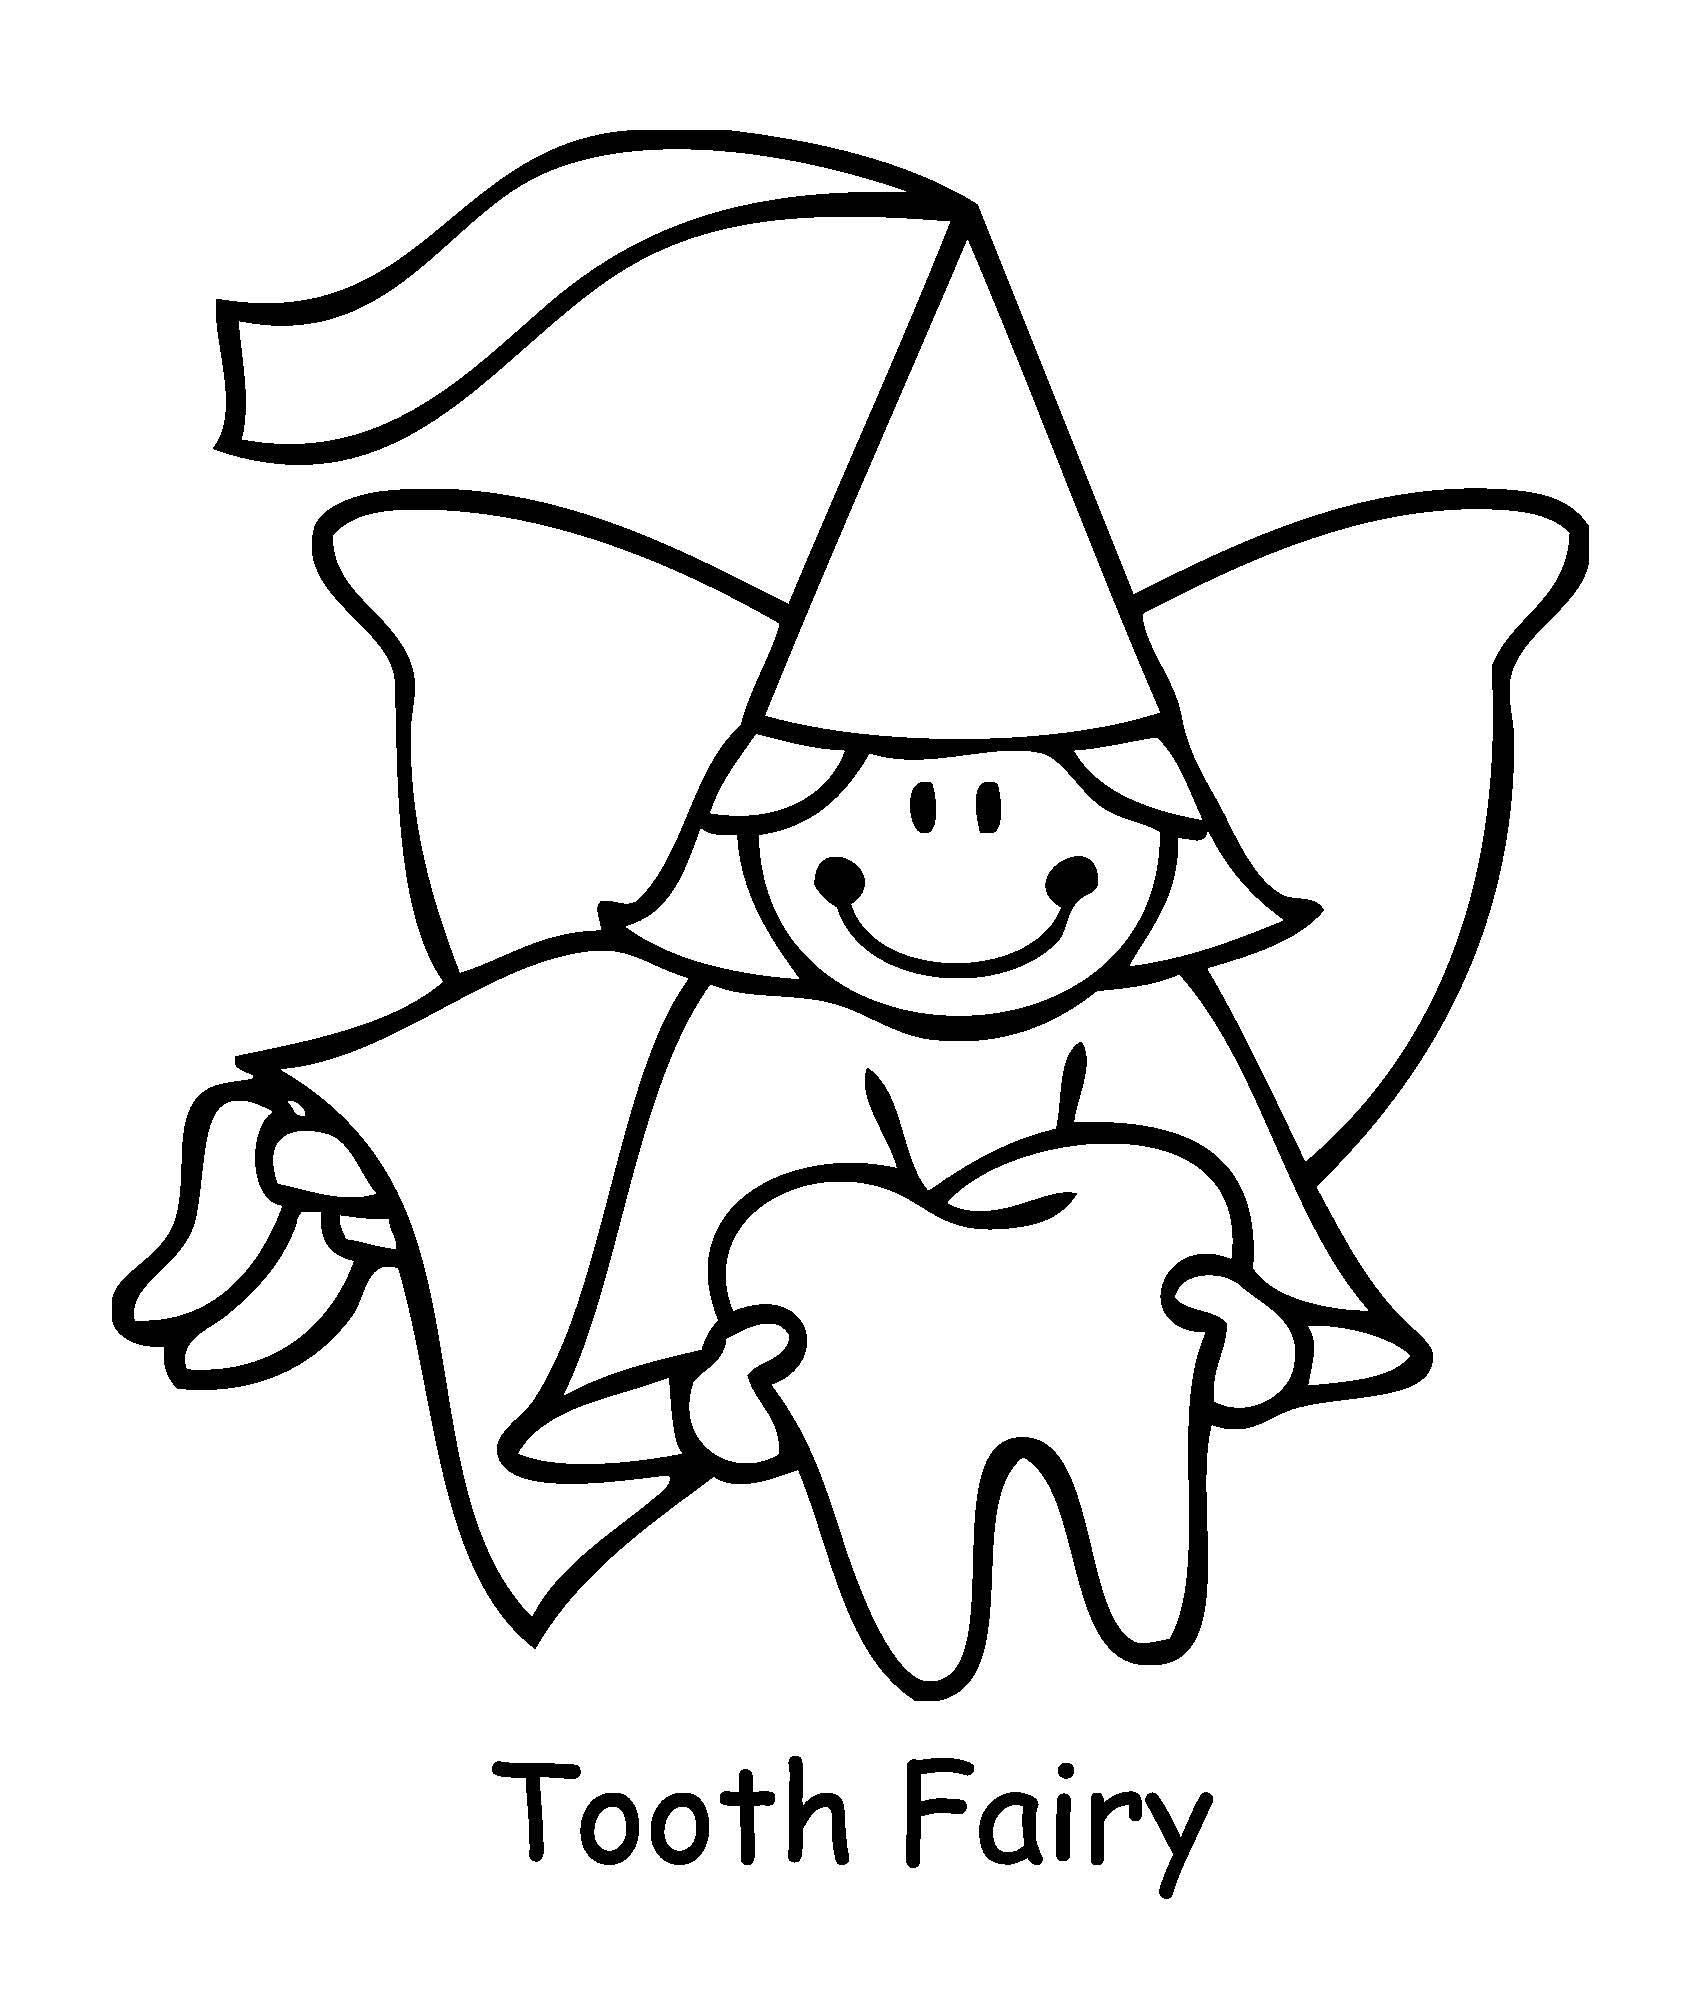 Tooth Coloring Pages Printable
 Coloring Pages for Tooth Fairy